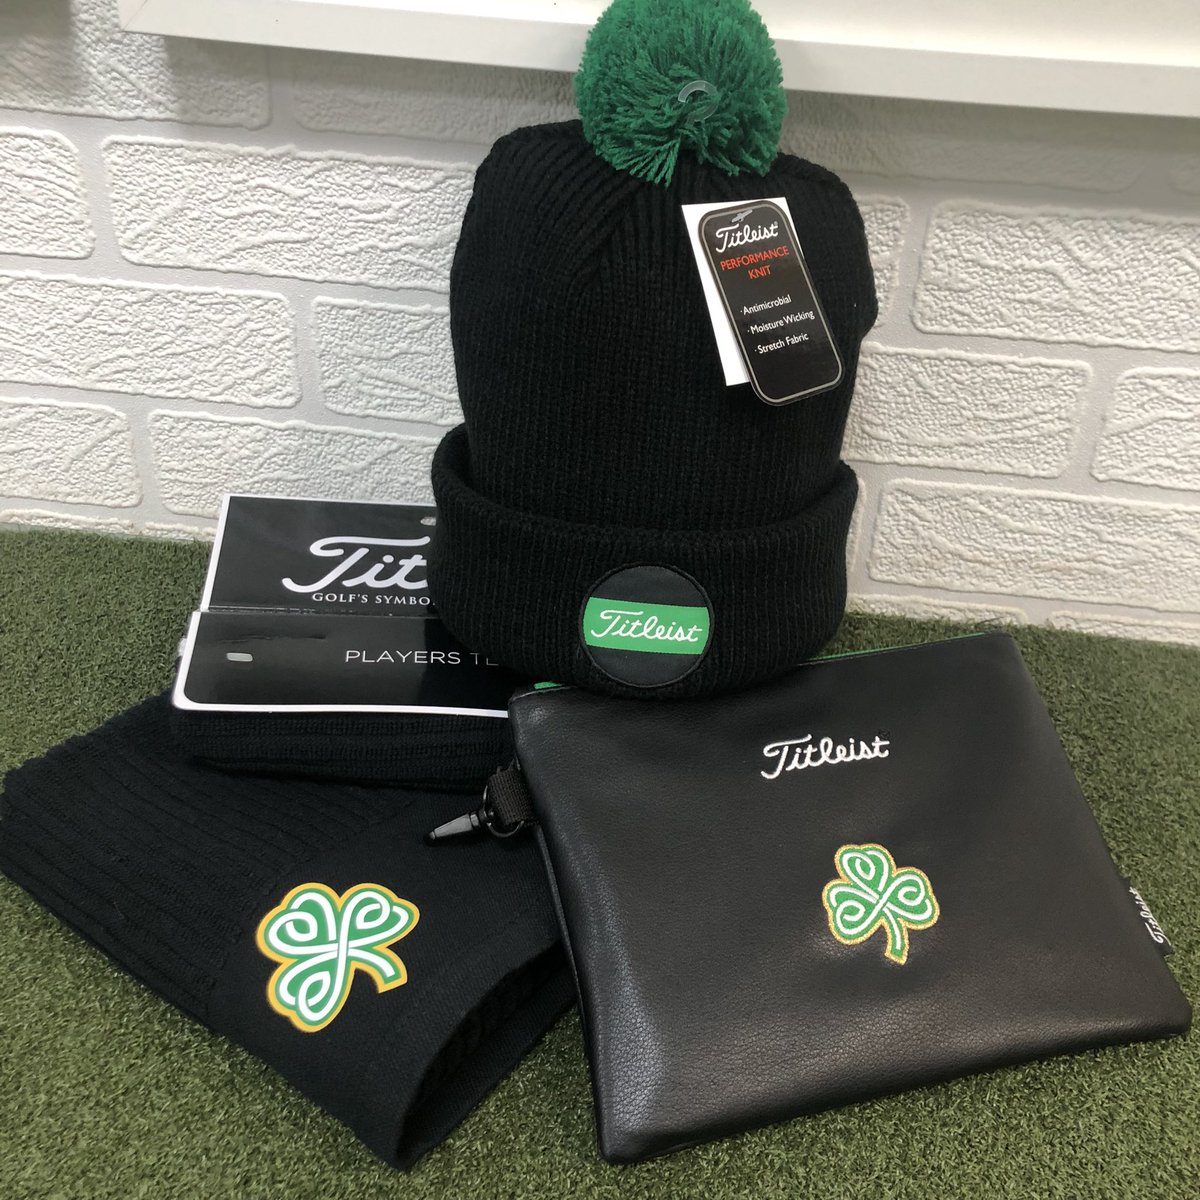 Happy St Patrick’s Day ☘️ 

A perfect set of Titleist UK & Ireland accessories to launch on St Patricks day, the new limited Shamrock collection.

☘️ Pom Pom beanie hat
☘️ Valuables Pouch
☘️ Players Towel

#titleist #limitedcollection #stpatricksday #shamrockcollection☘️